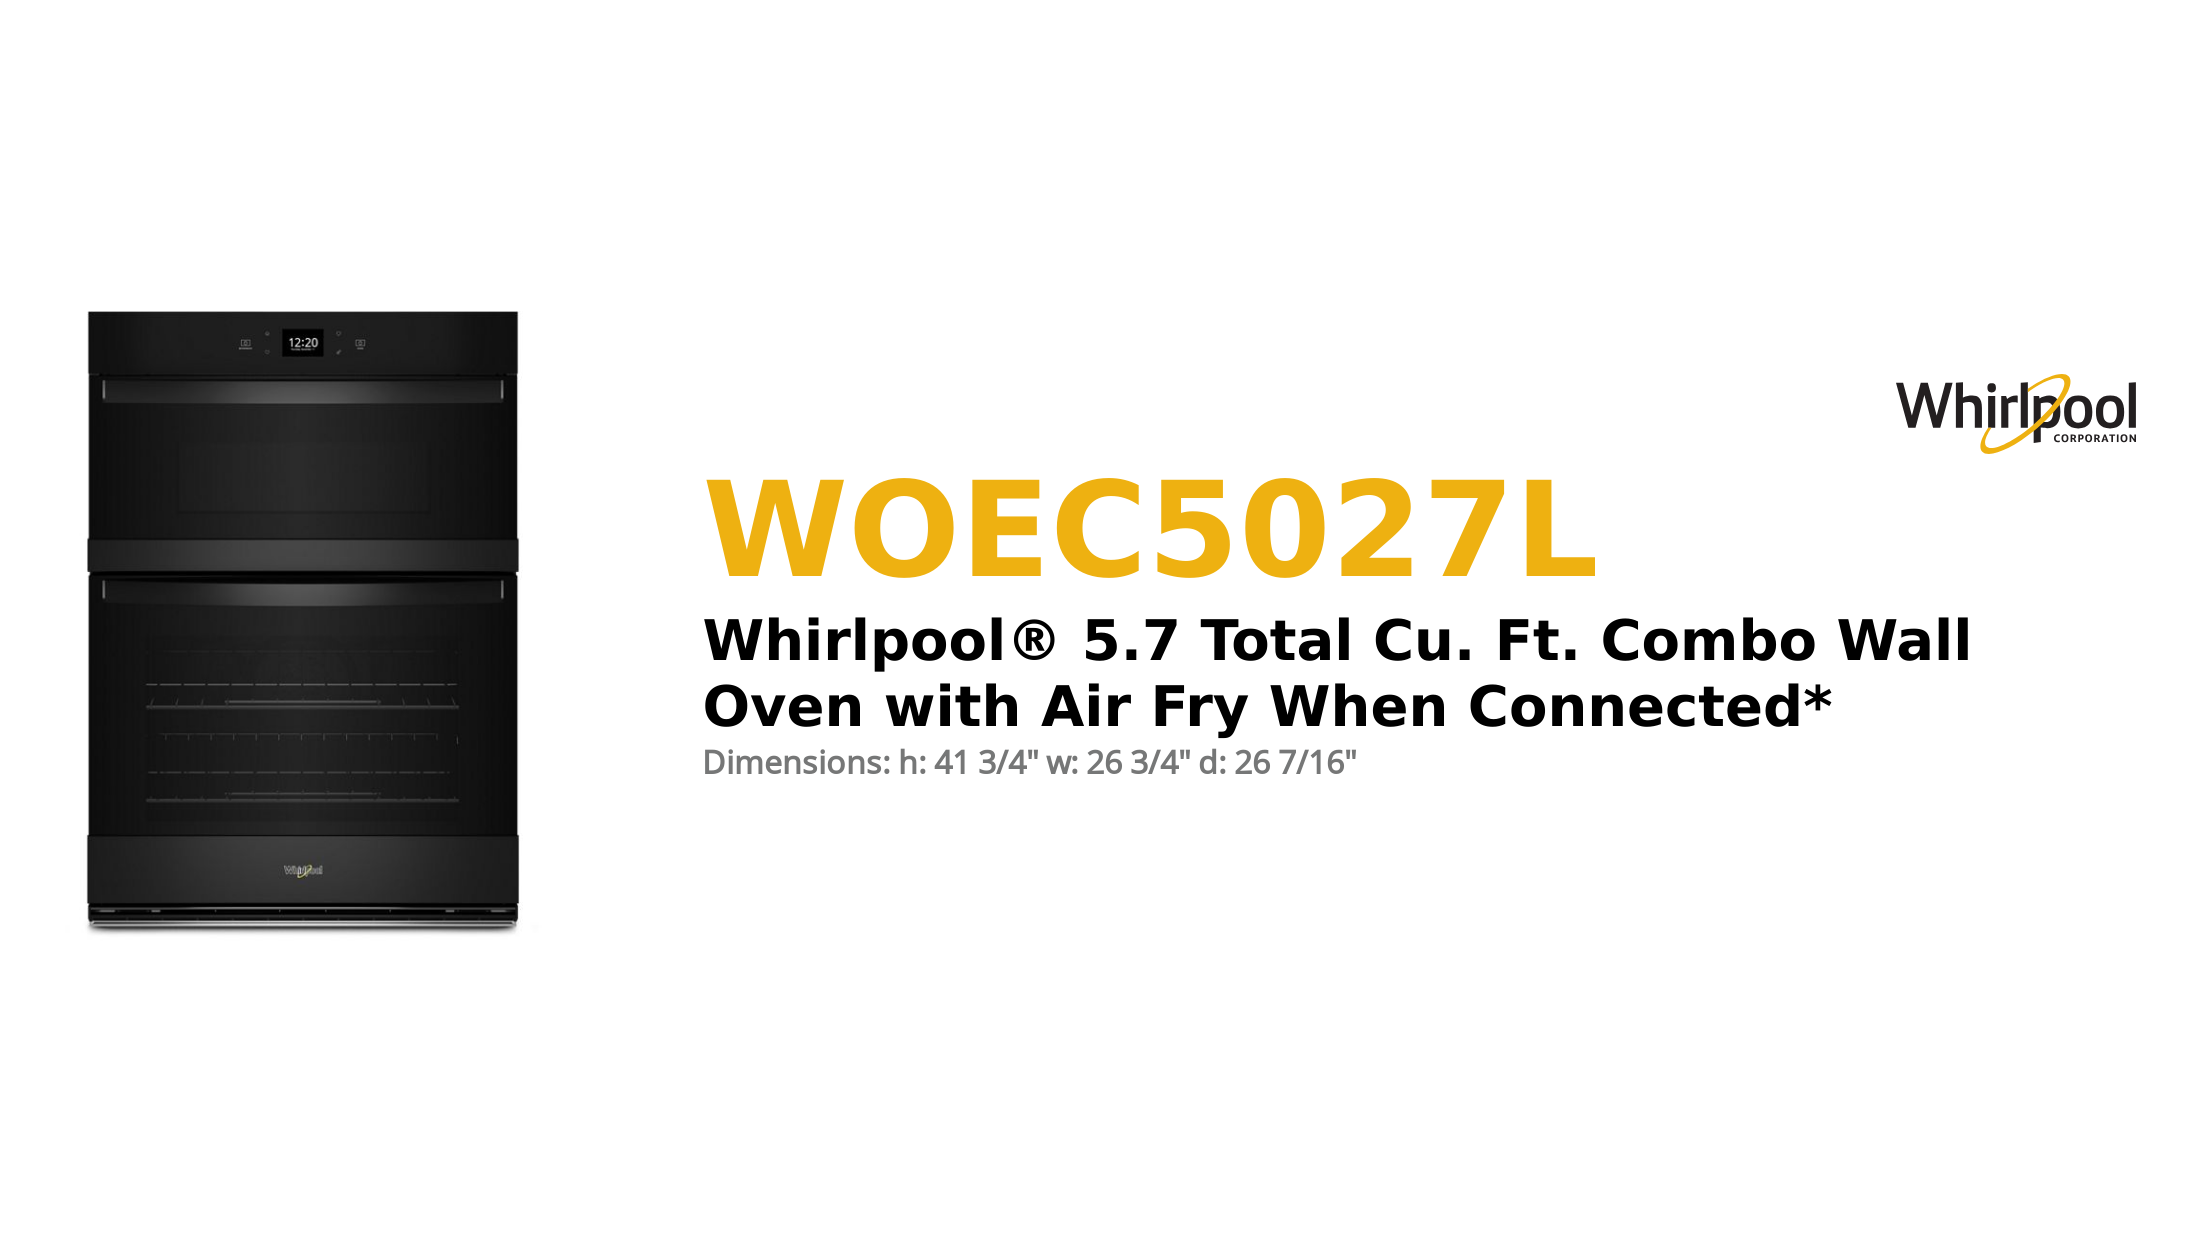 



WHIRLPOOL® 5.7 TOTAL CU. FT. COMBO WALL OVEN WITH AIR FRY WHEN CONNECTED*



